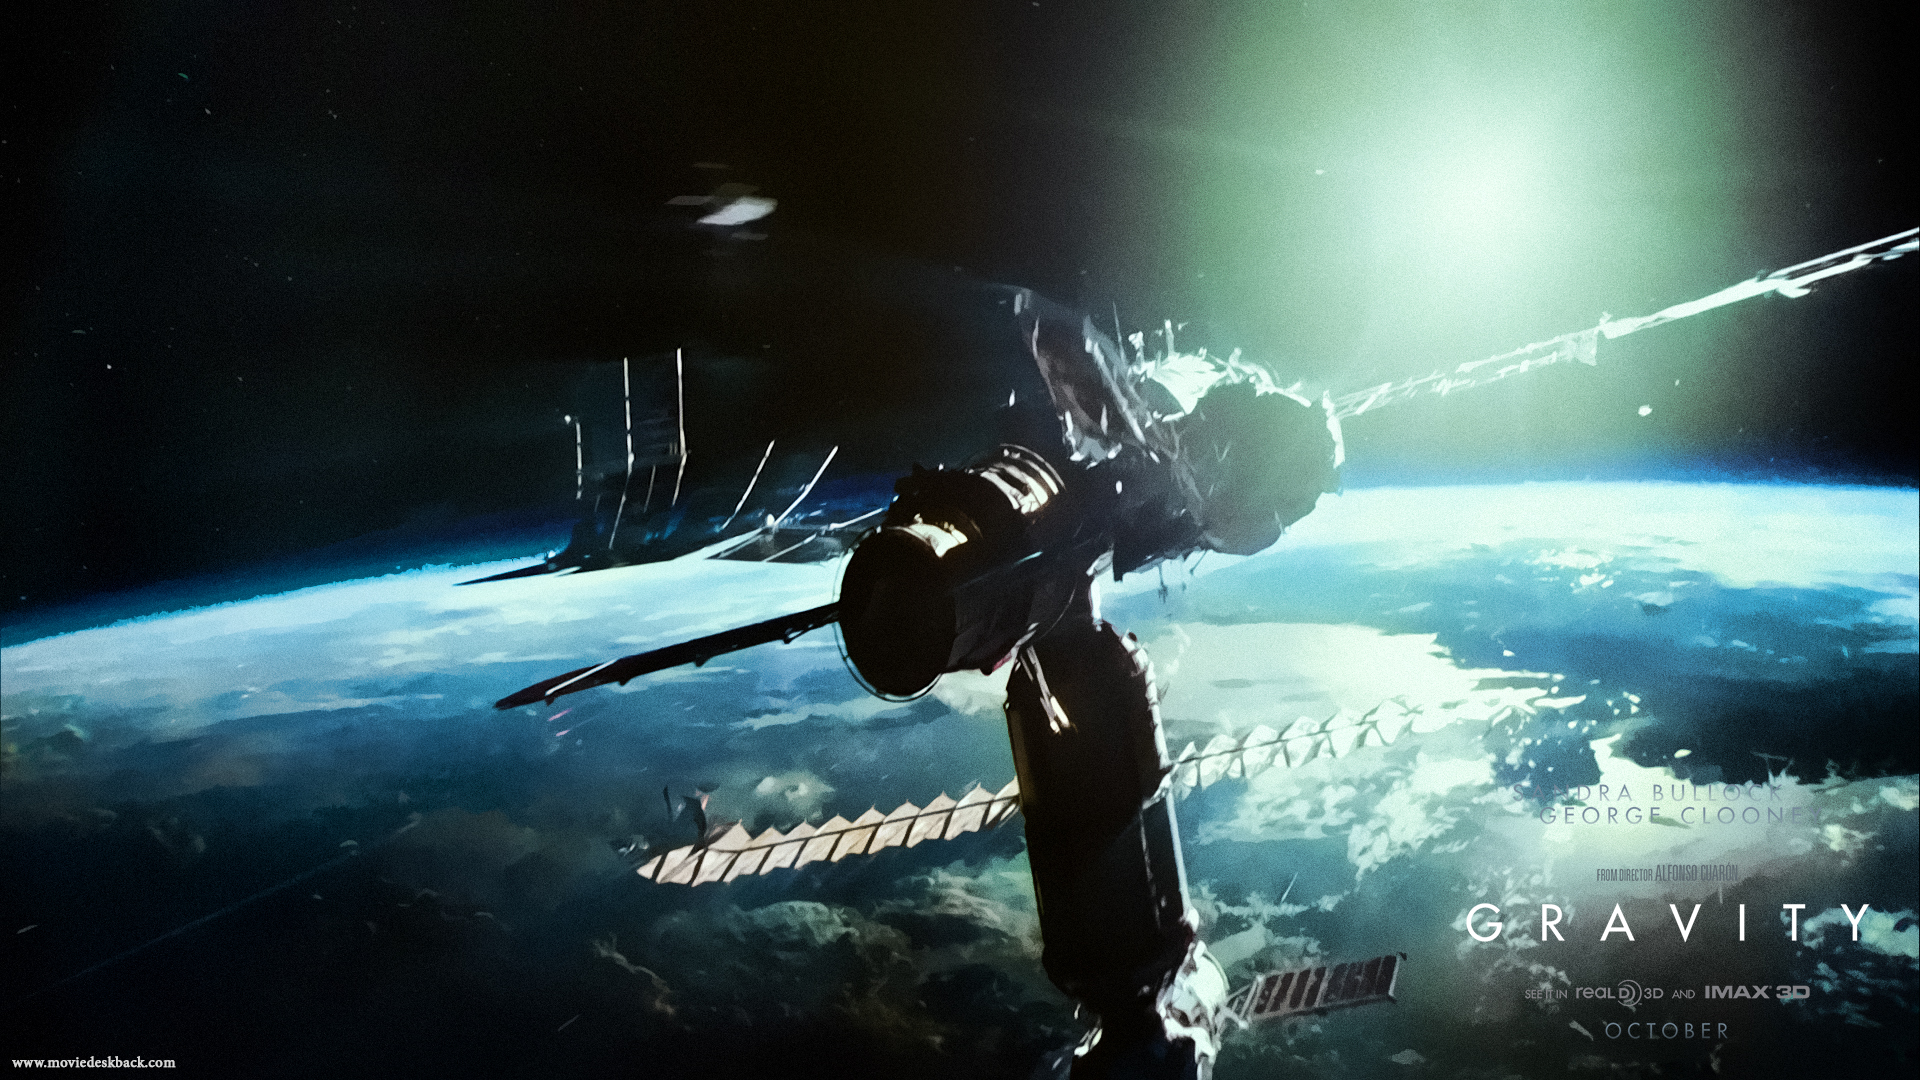 Gravity hd movie dubbed in tamil